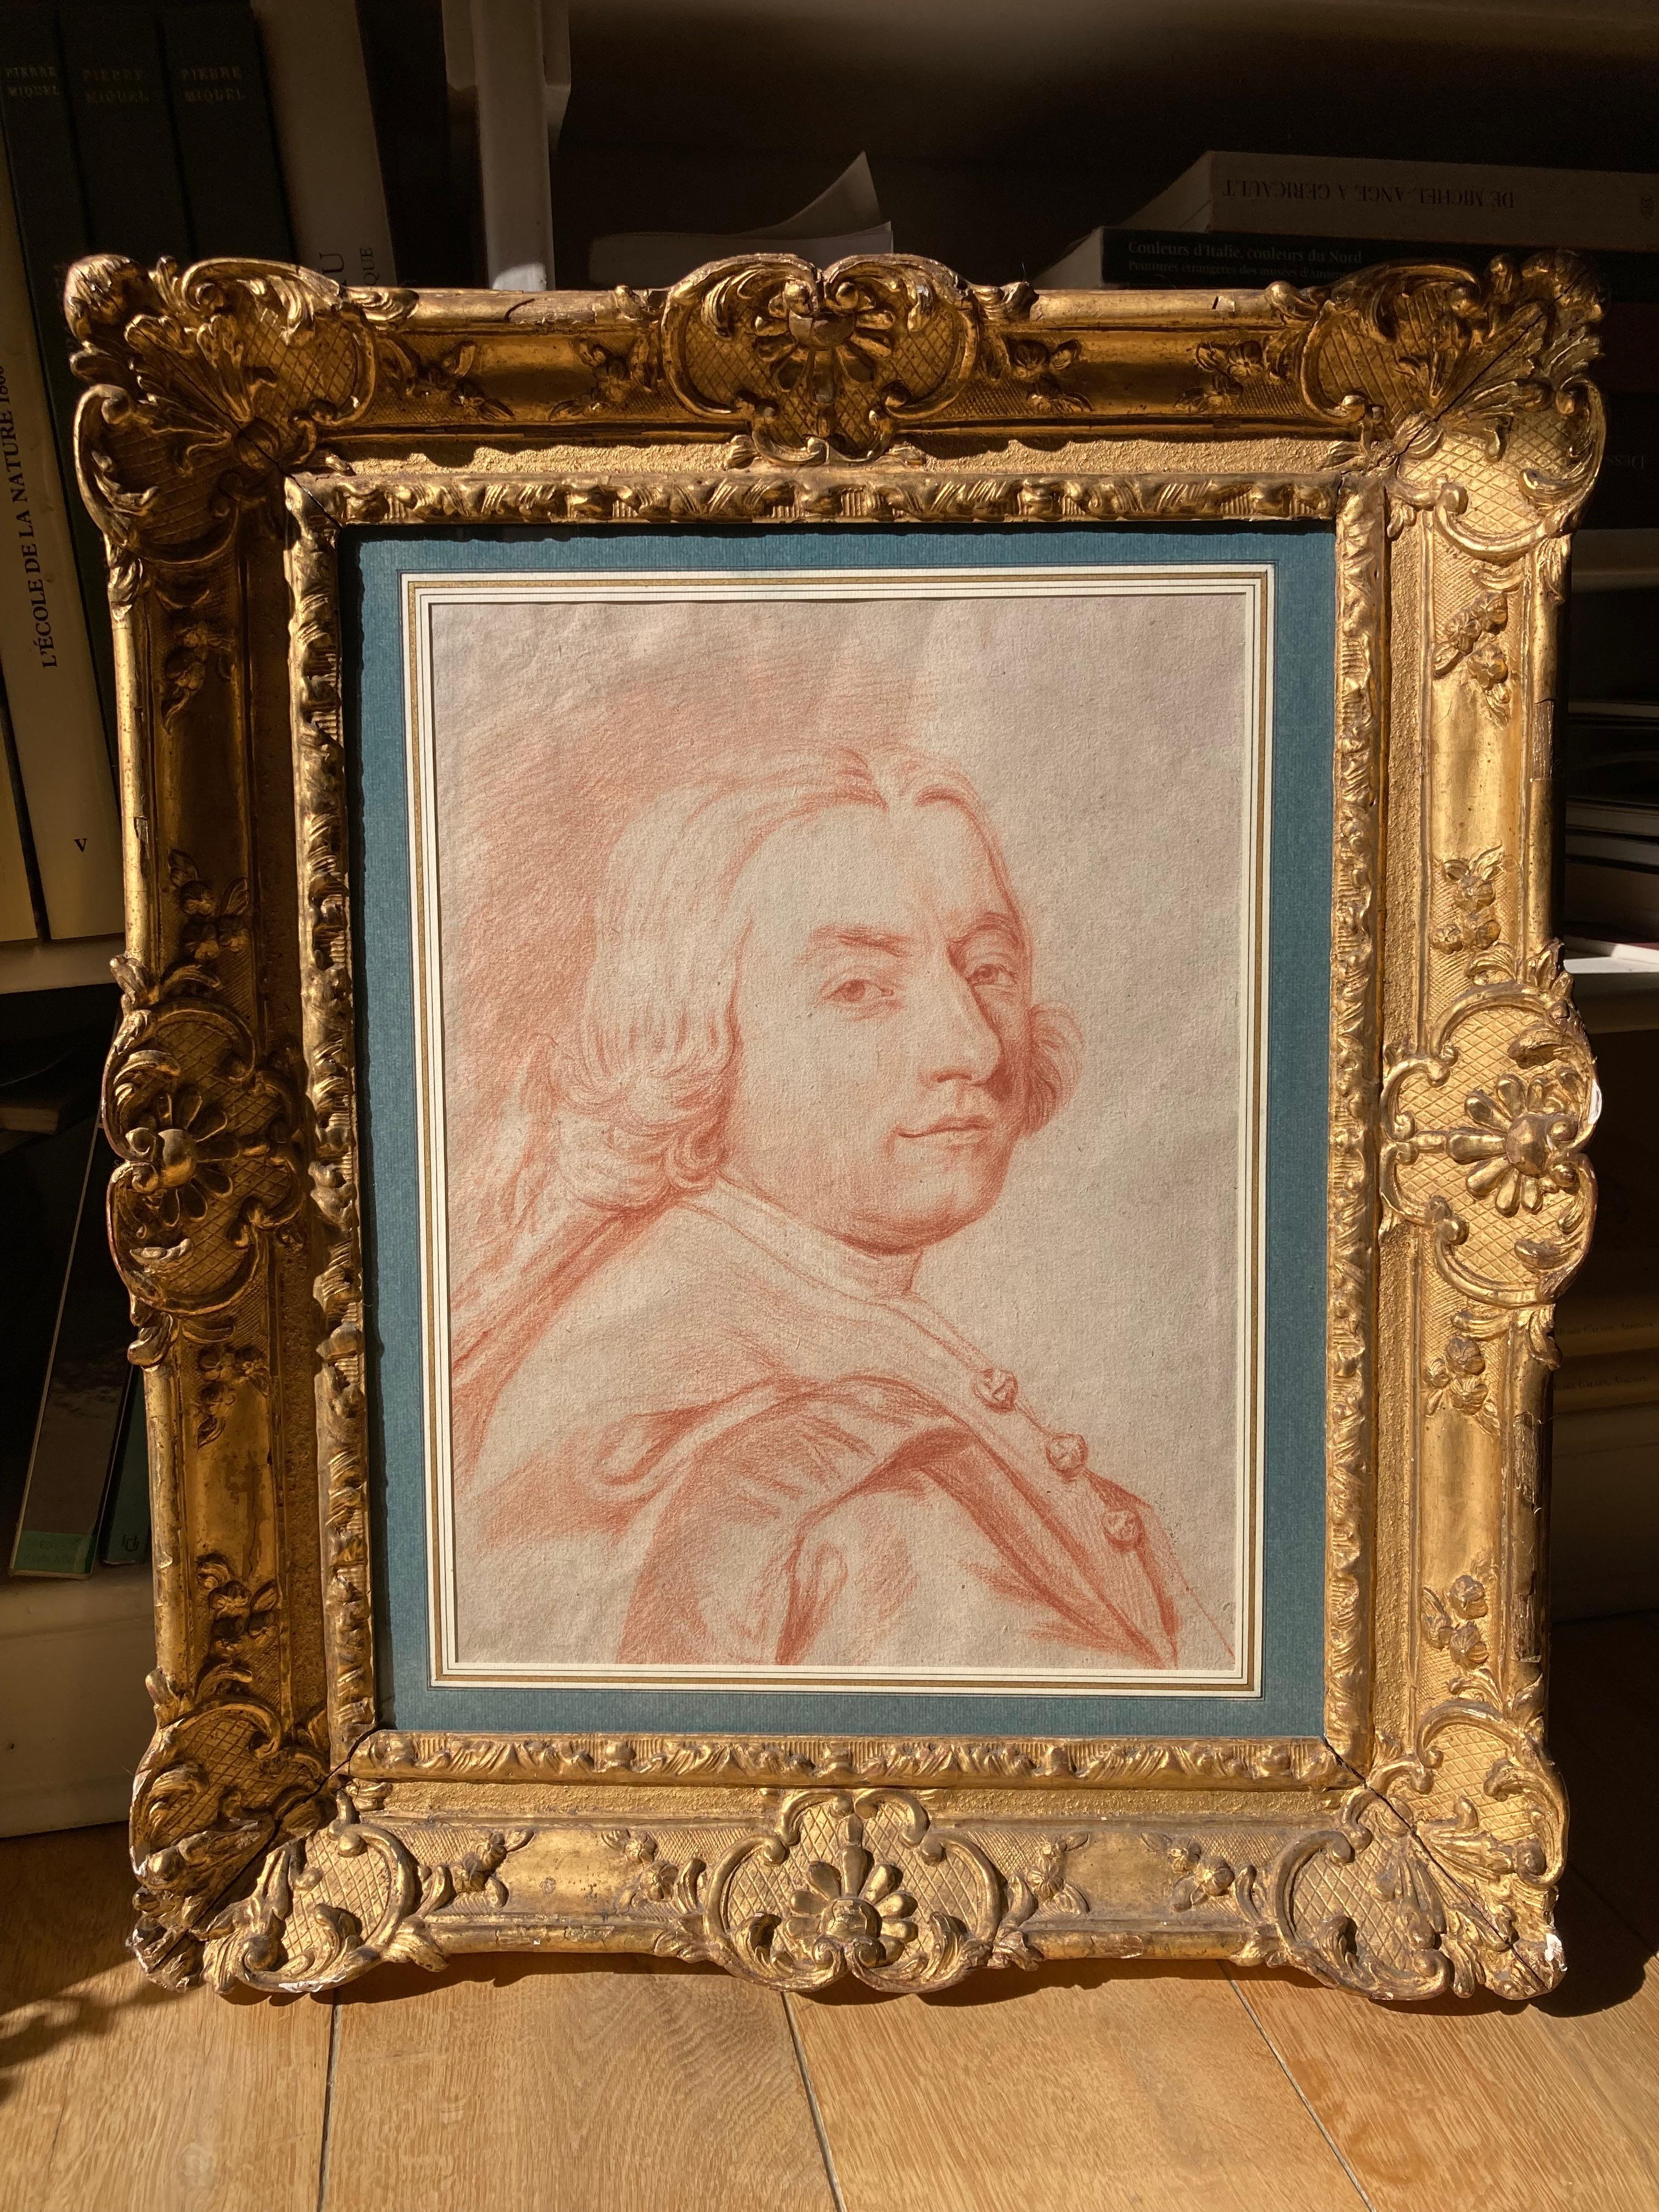 French School - 18th century
Paris, Louis XV-Transition period

Portrait of a man seen from three quarters
Mid-18th century
Sanguine
40 x 29 cm
59 x 50 cm framed
Superb Transition period key frame in carved and gilded wood with old fastener and